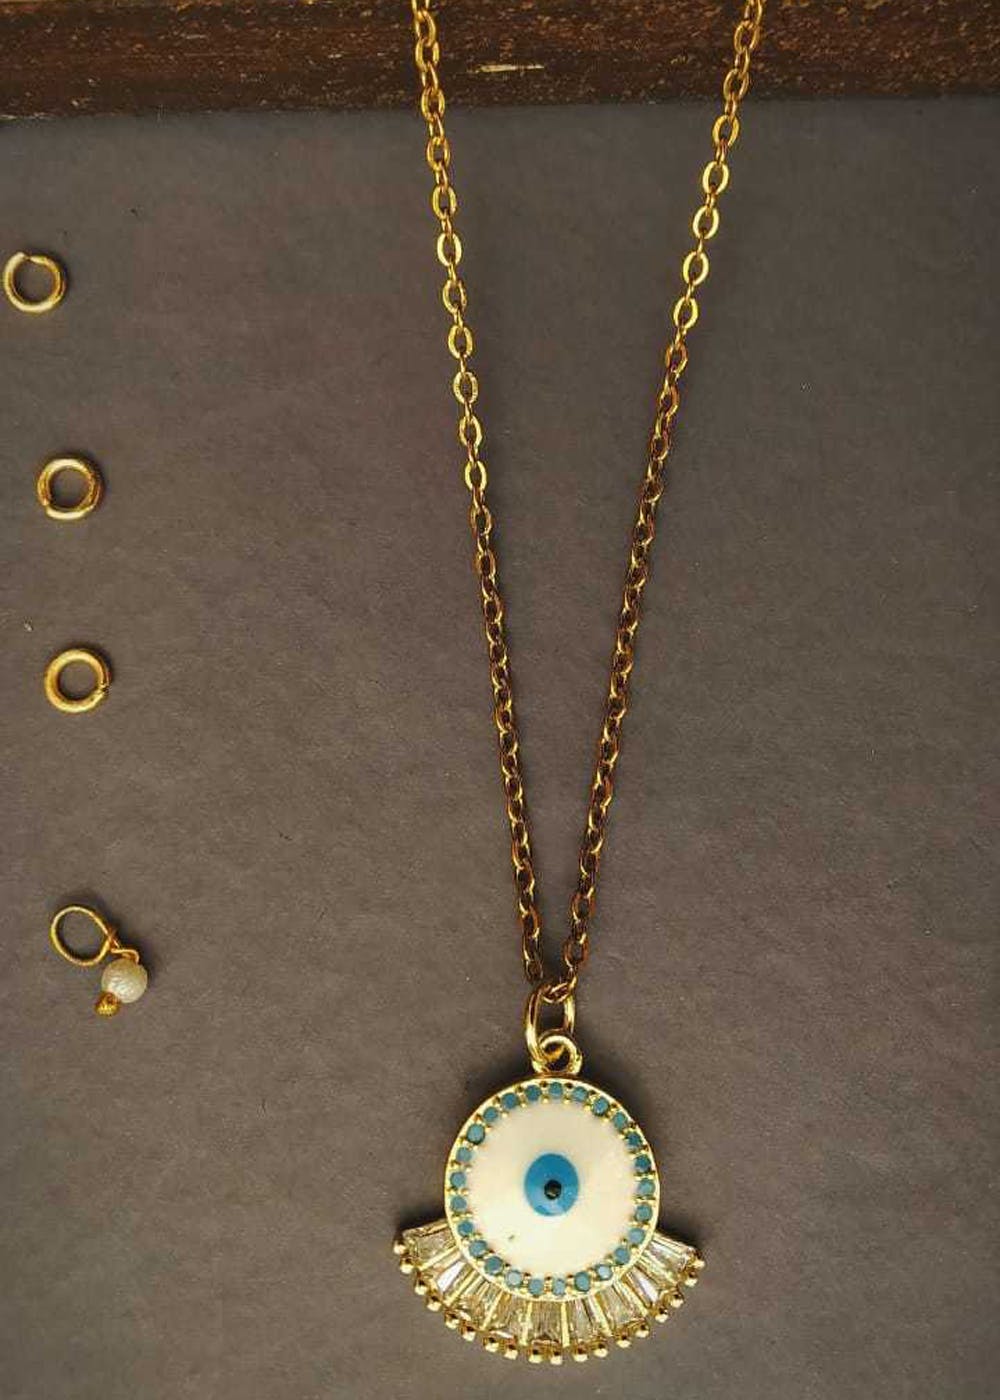 Unreal Realistic Eyeball Necklace, 16 36 Long Chain, Ward off Evil Eye,  Gift Bag , Blue Eye Nazar Jewelry, Males or Females - Etsy